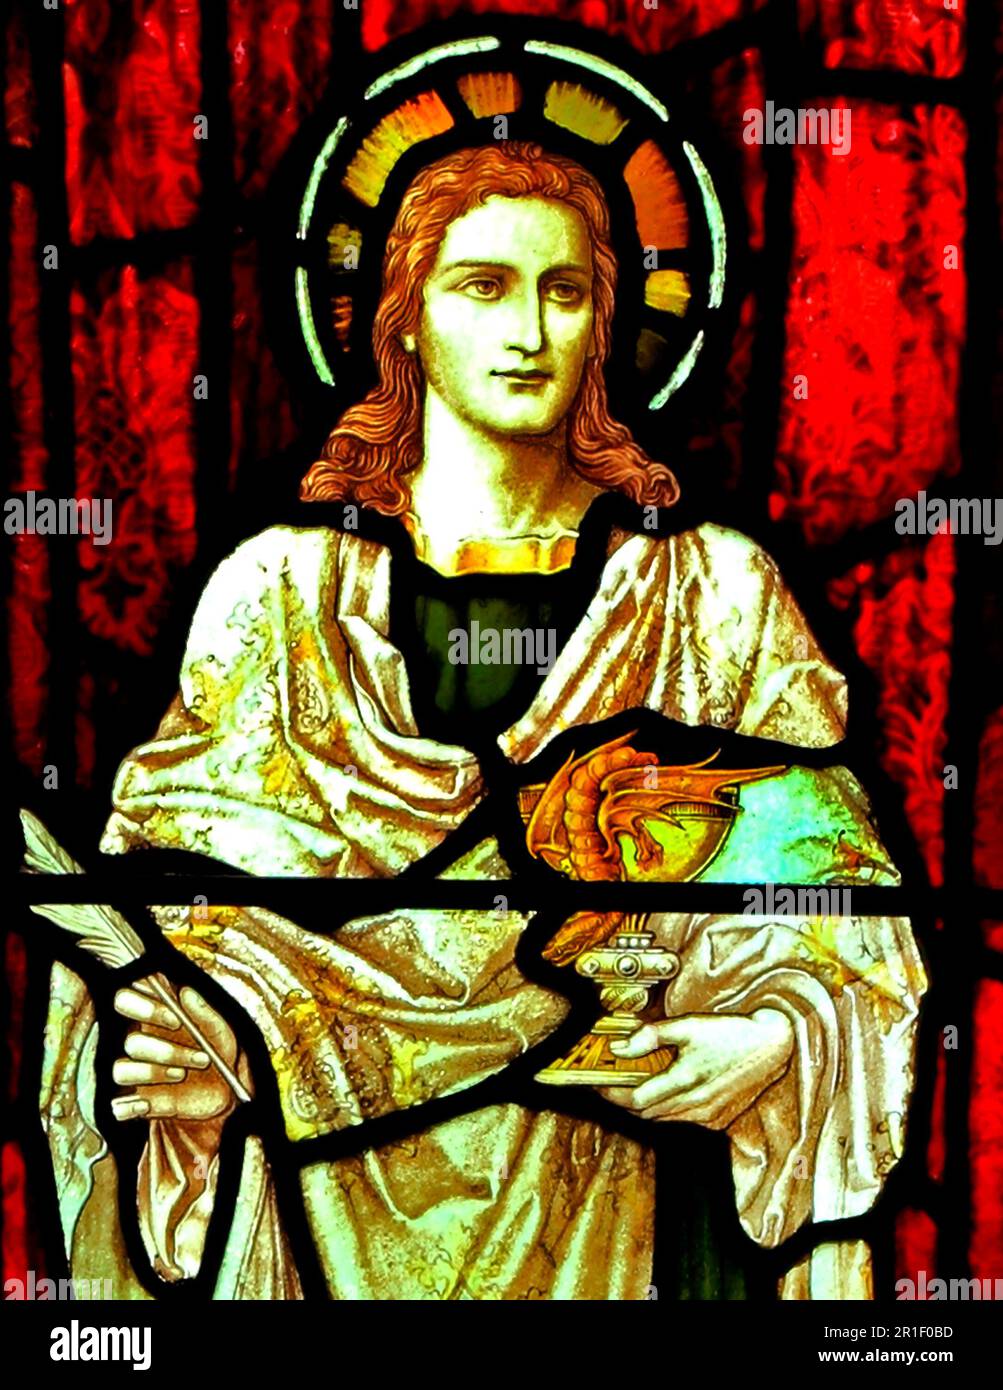 Saint John, holding wine cup, chalice, with snake, stained glass window, Snettisham church, Norfolk, England Stock Photo